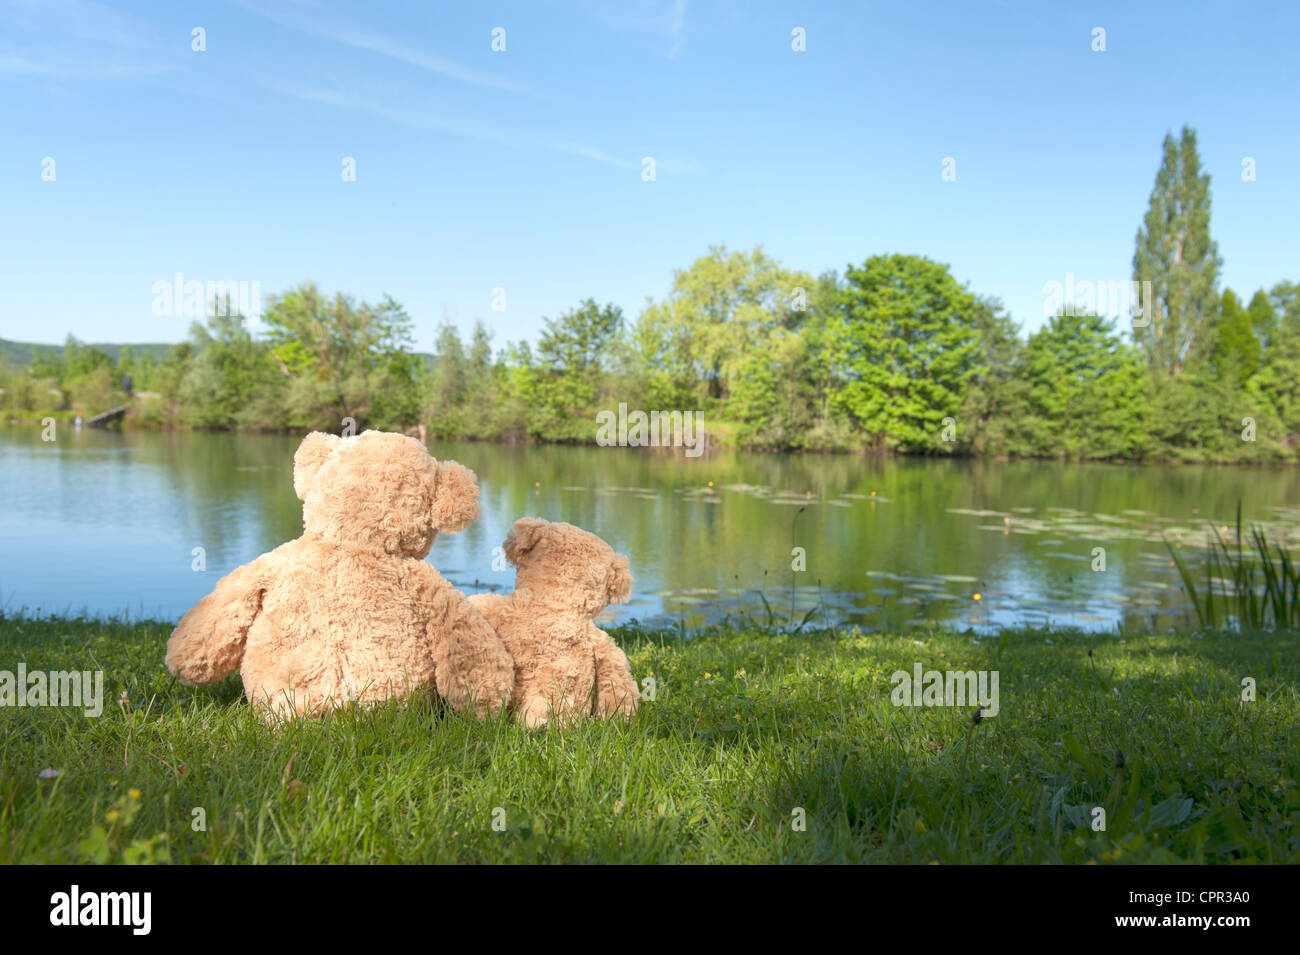 back view of teddy bears looking at the lake Stock Photo